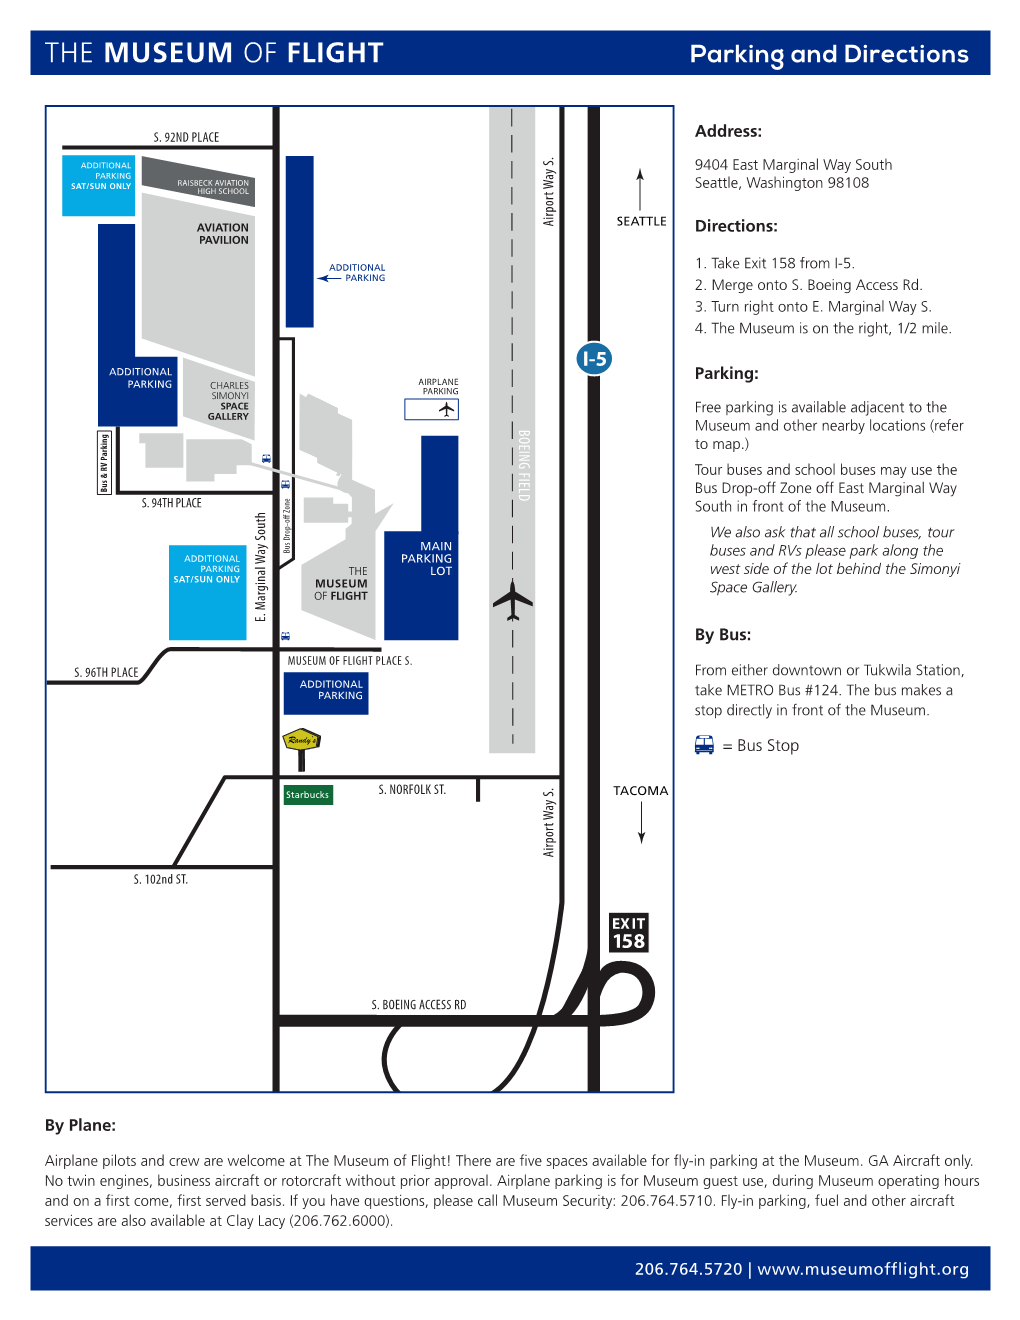 THE MUSEUM of FLIGHT Parking and Directions